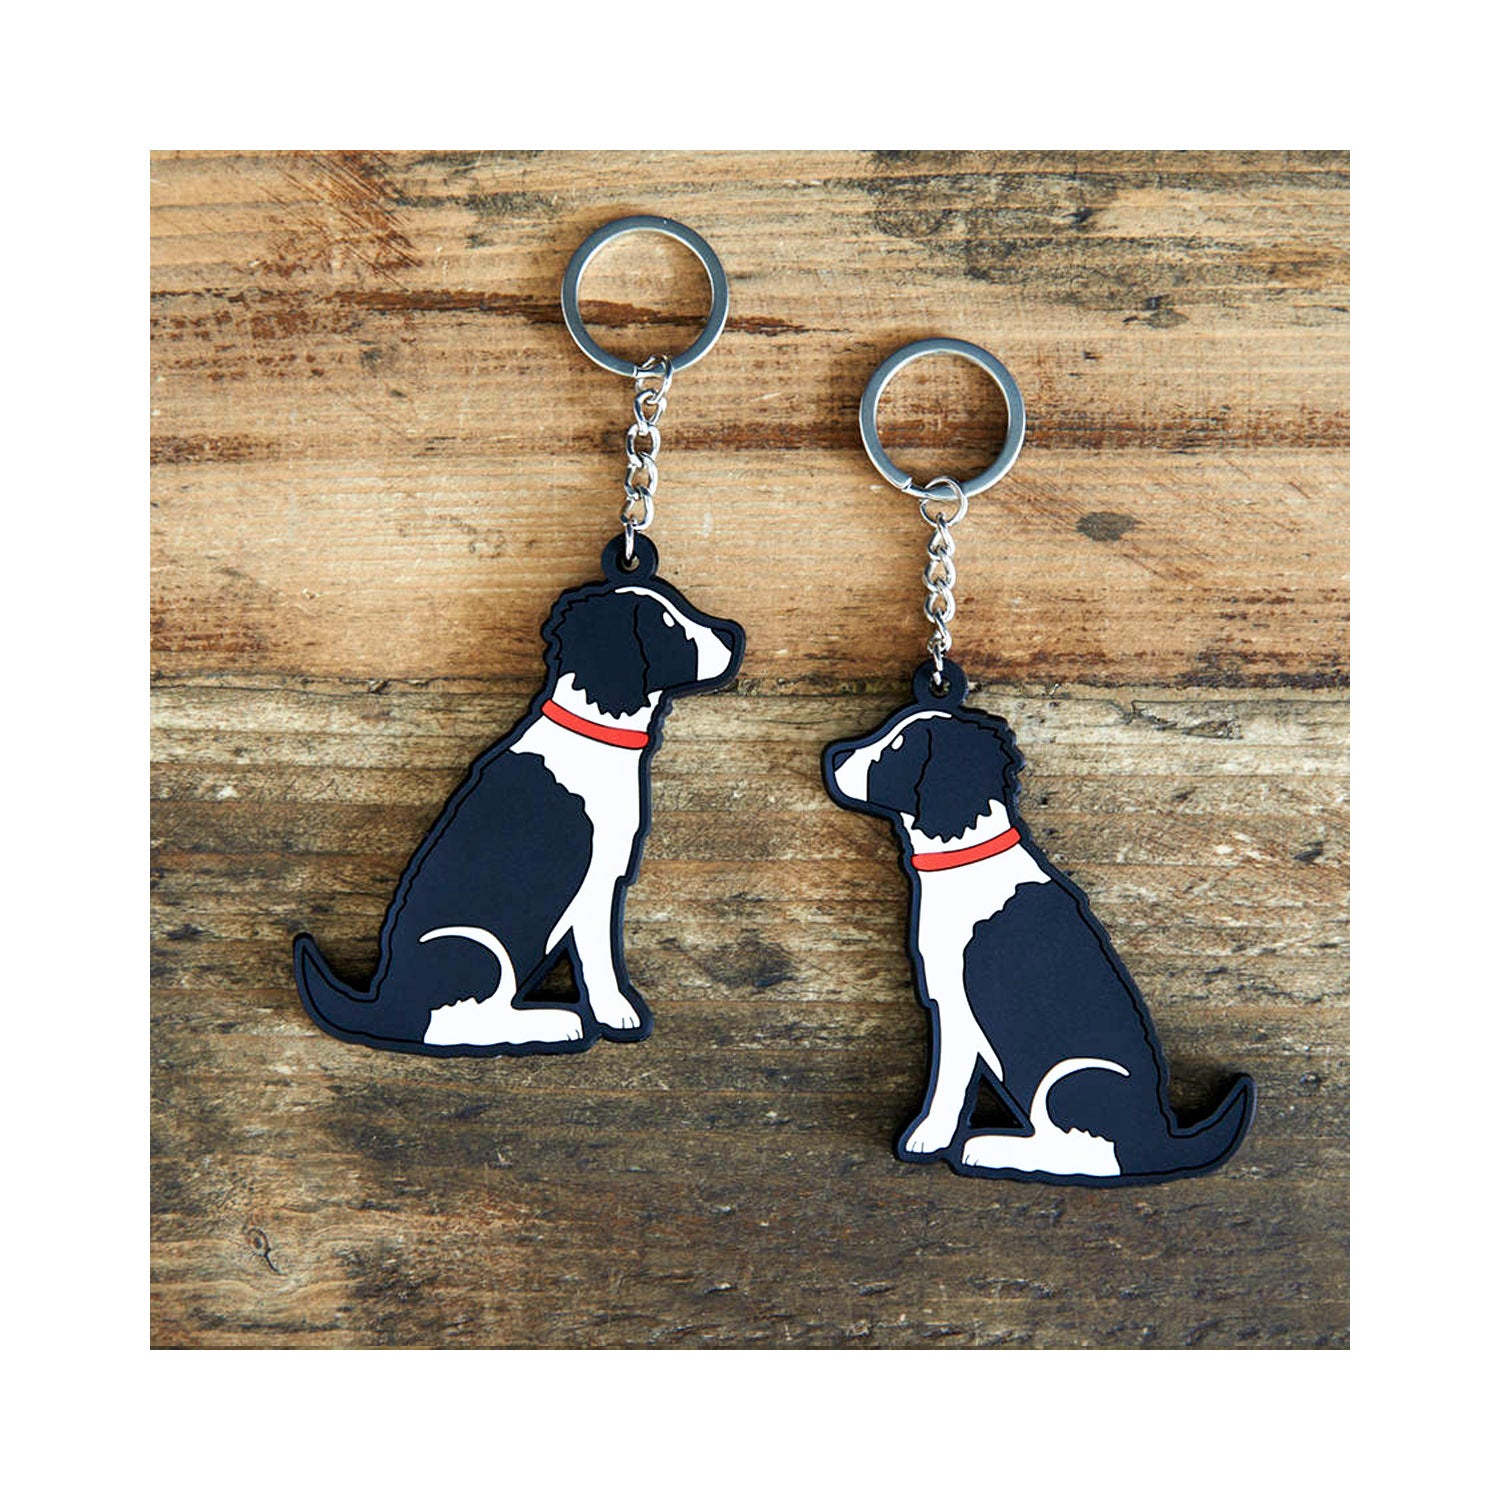 Dog Lover Gifts available at Dog Krazy Gifts  - George The Black & White Springer Spaniel Keyring - part of the Sweet William range available from Dog Krazy Gifts